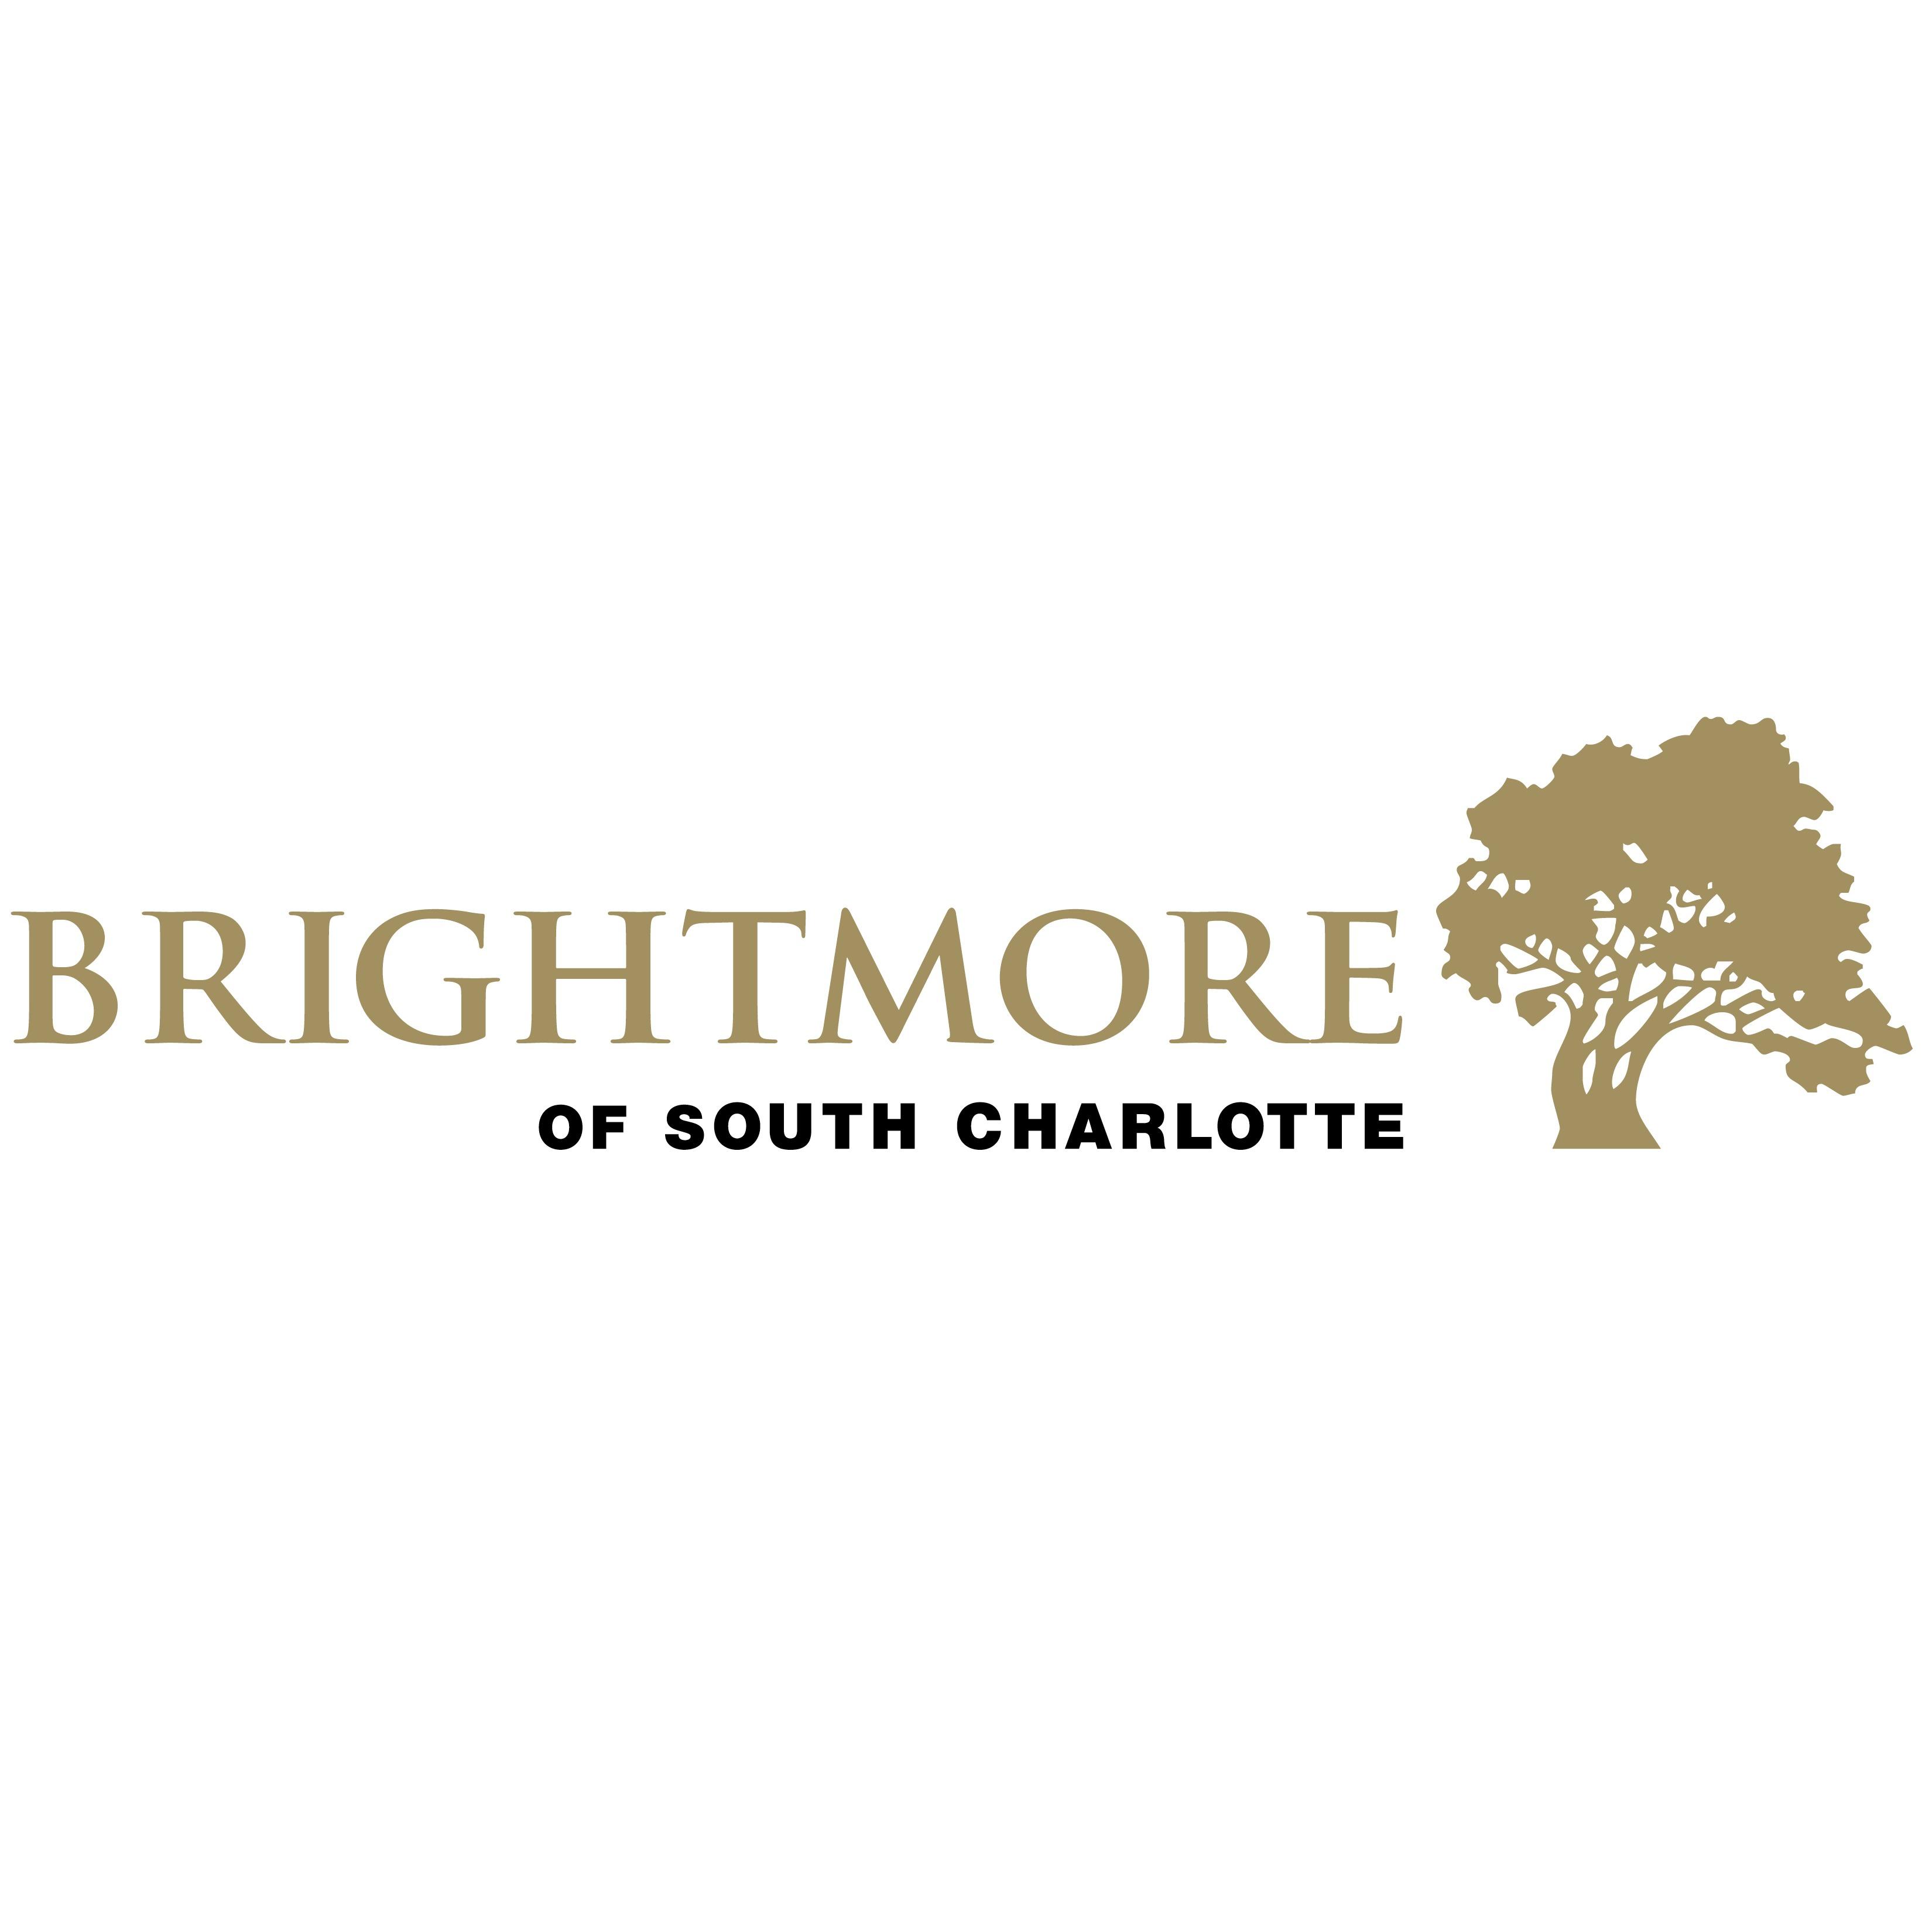 Brightmore of South Charlotte